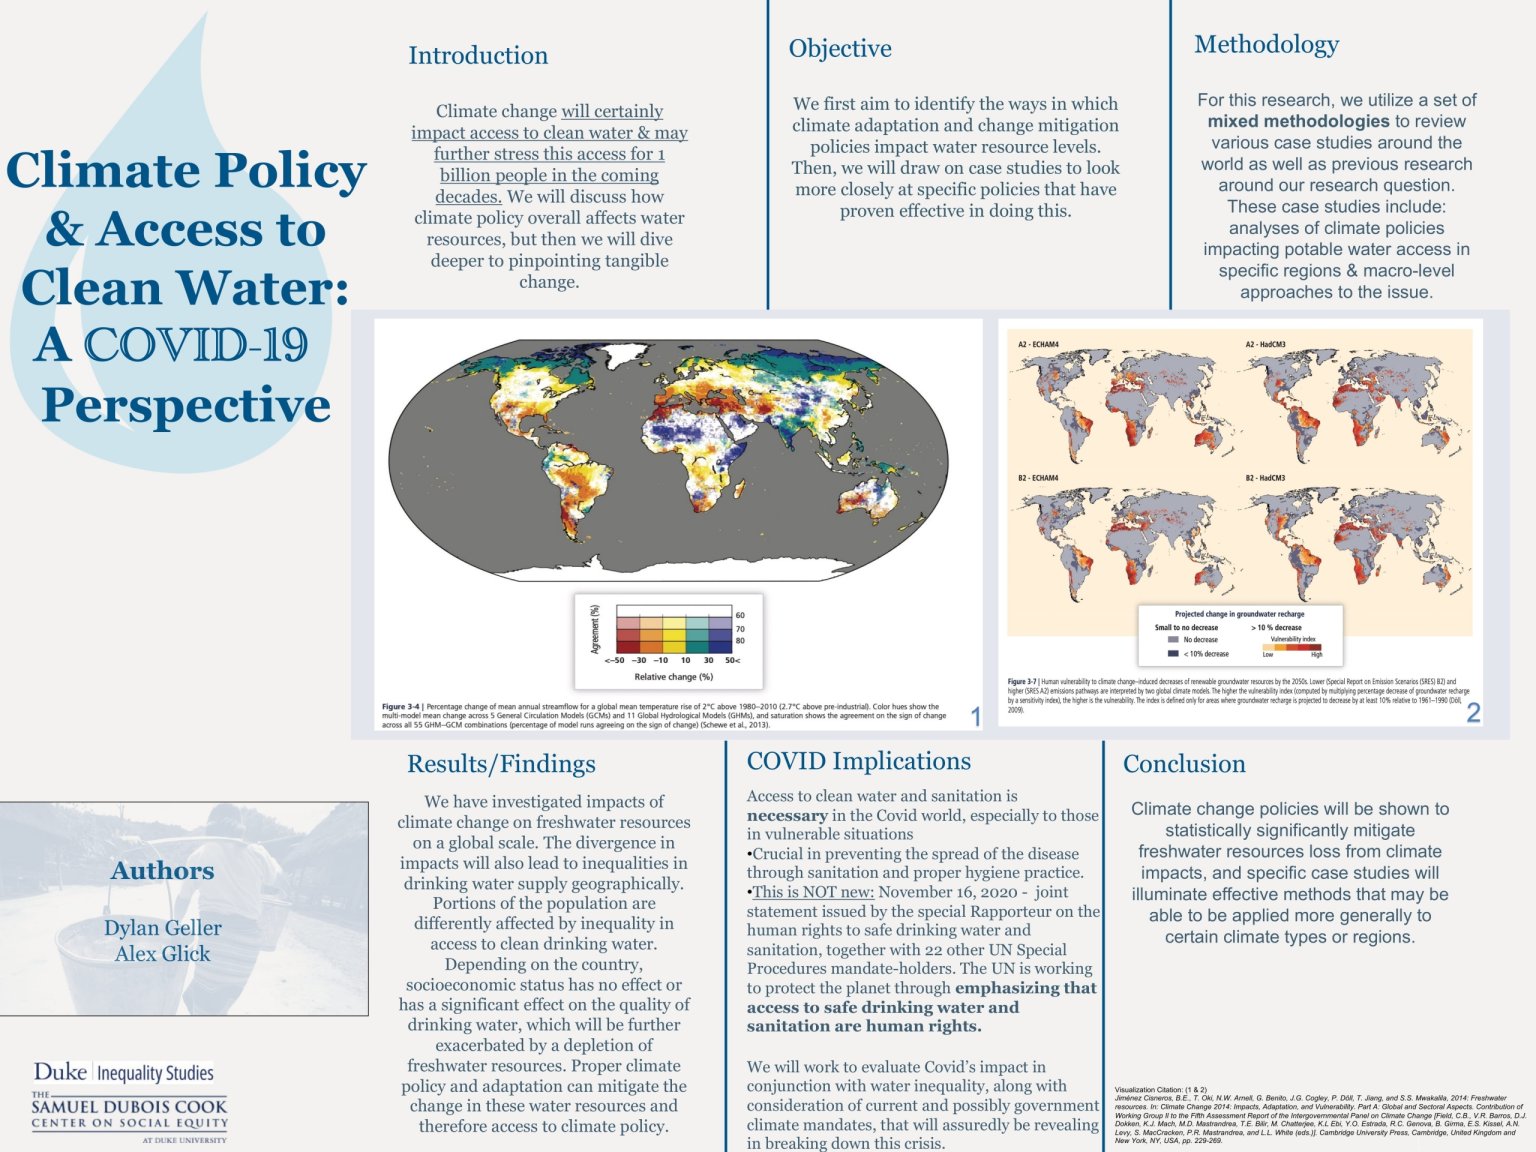 poster titled "Climate policy & access to clean water: A COVID-19 perspective"